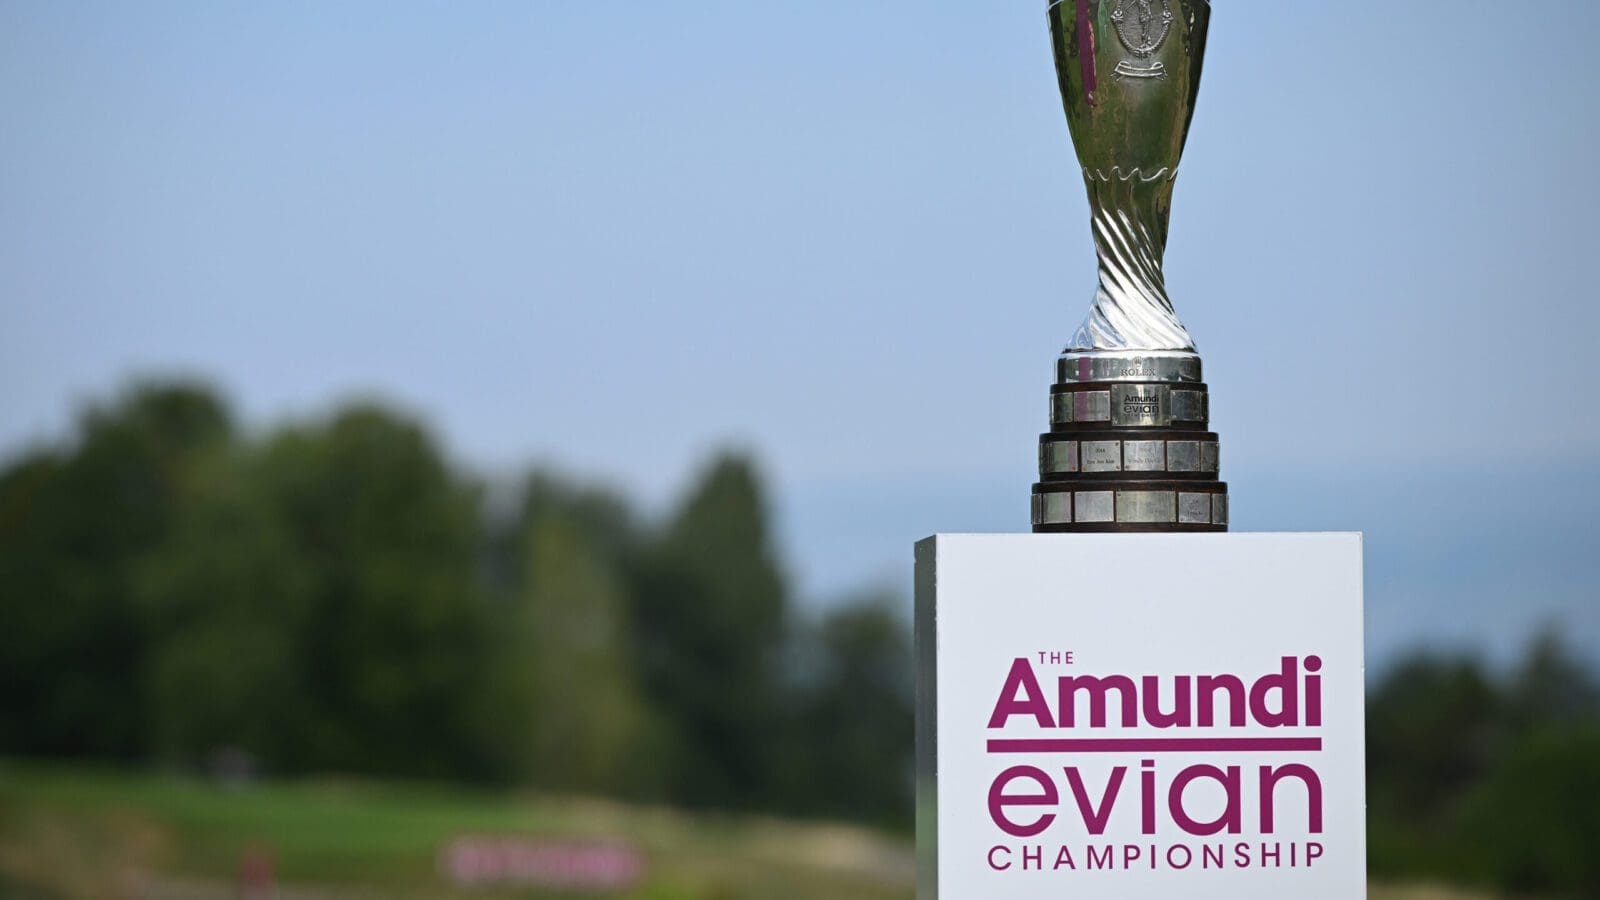 evian championship scaled